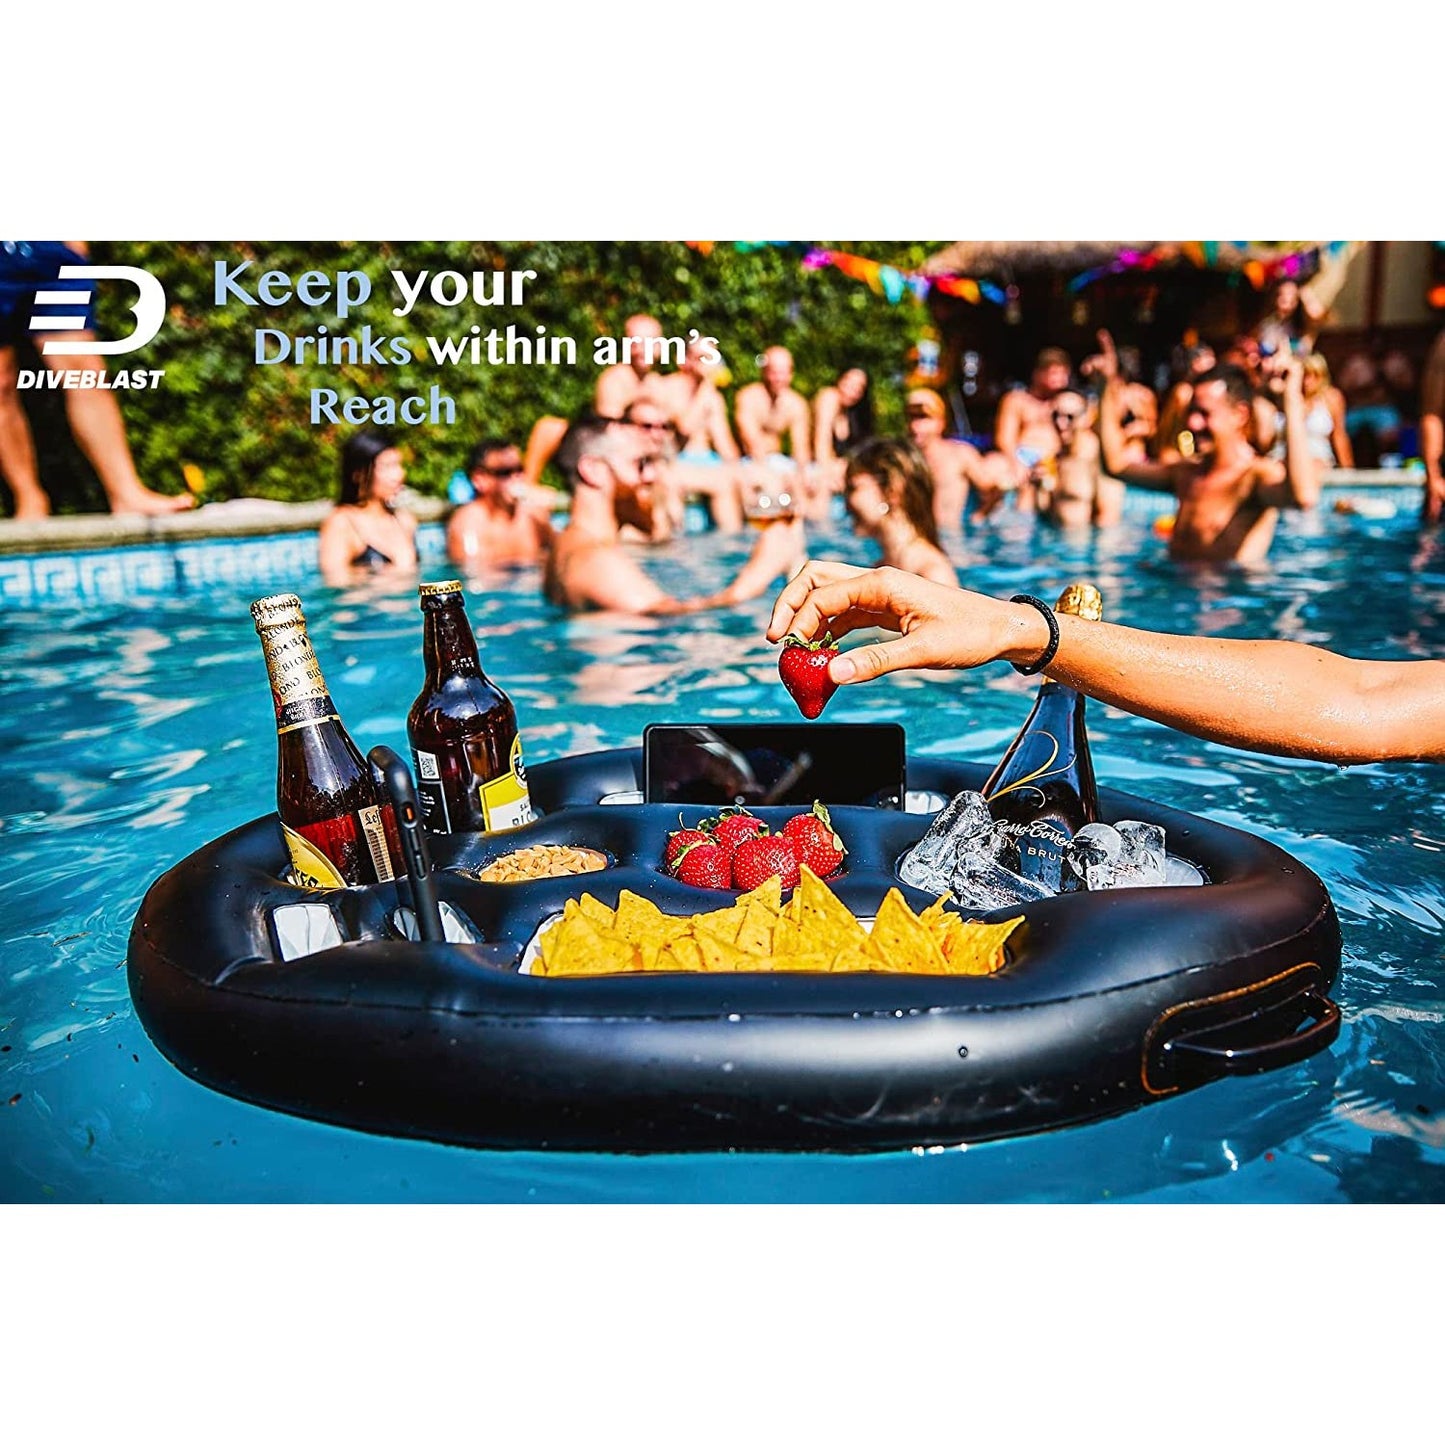 A black floating food and drink tray in a pool with people in the background.